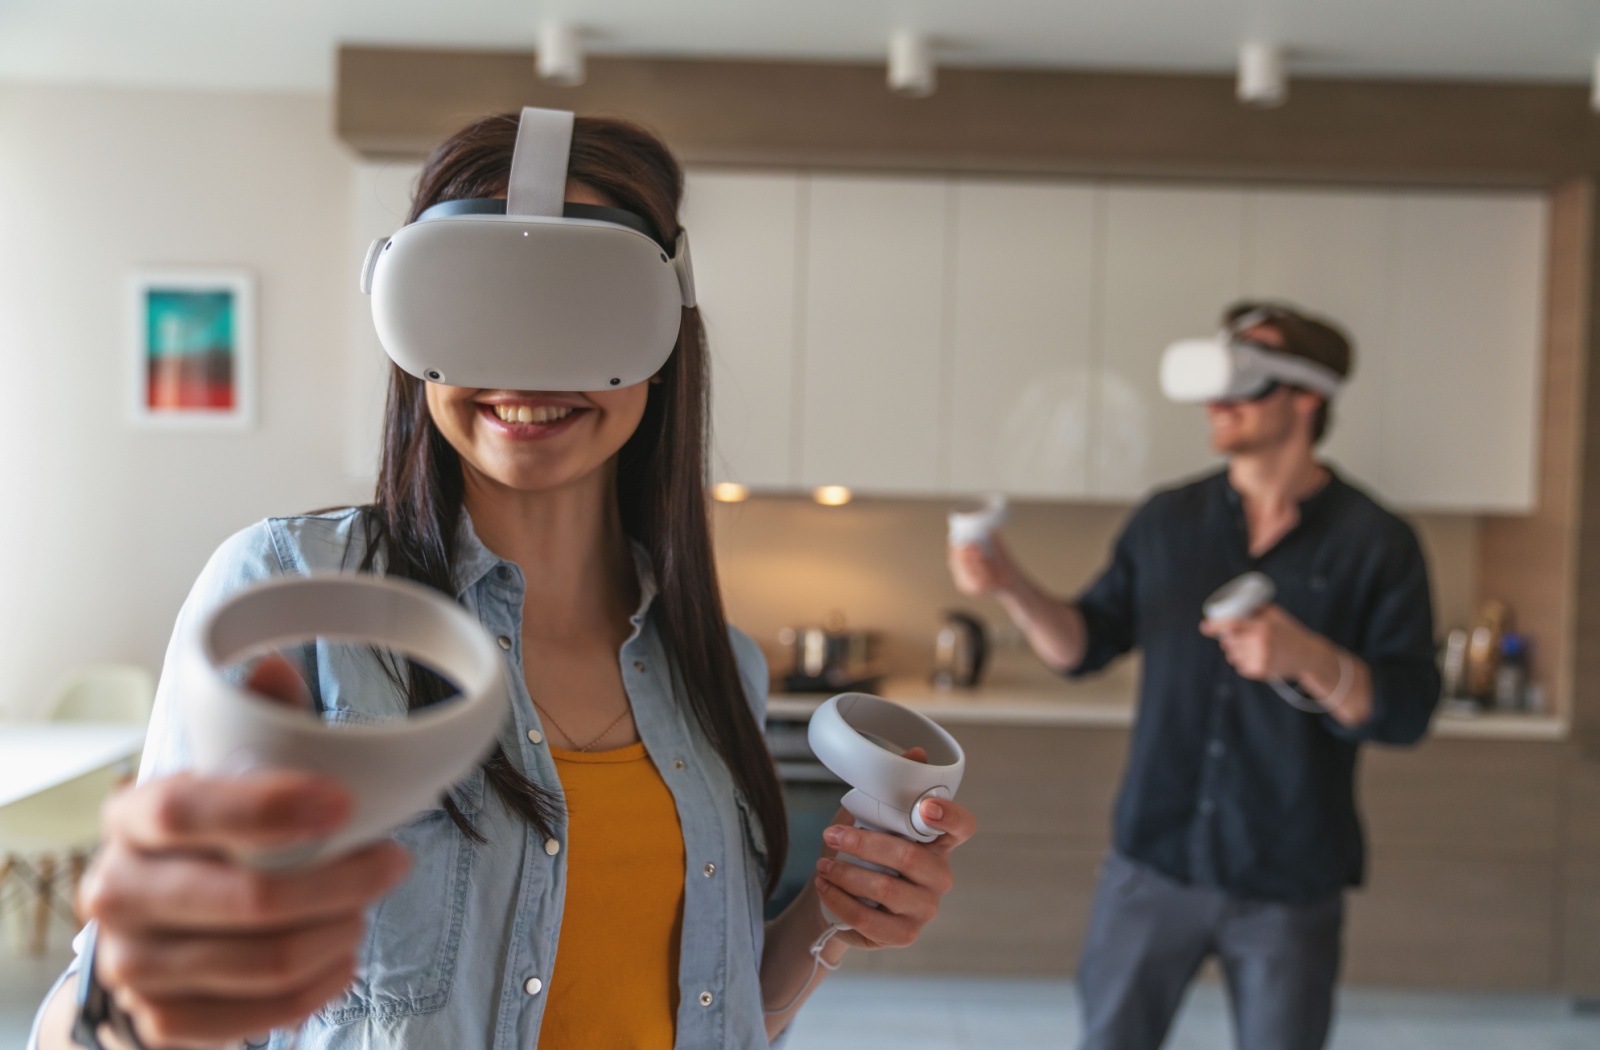 A young couple enjoys playing with their virtual reality headset.